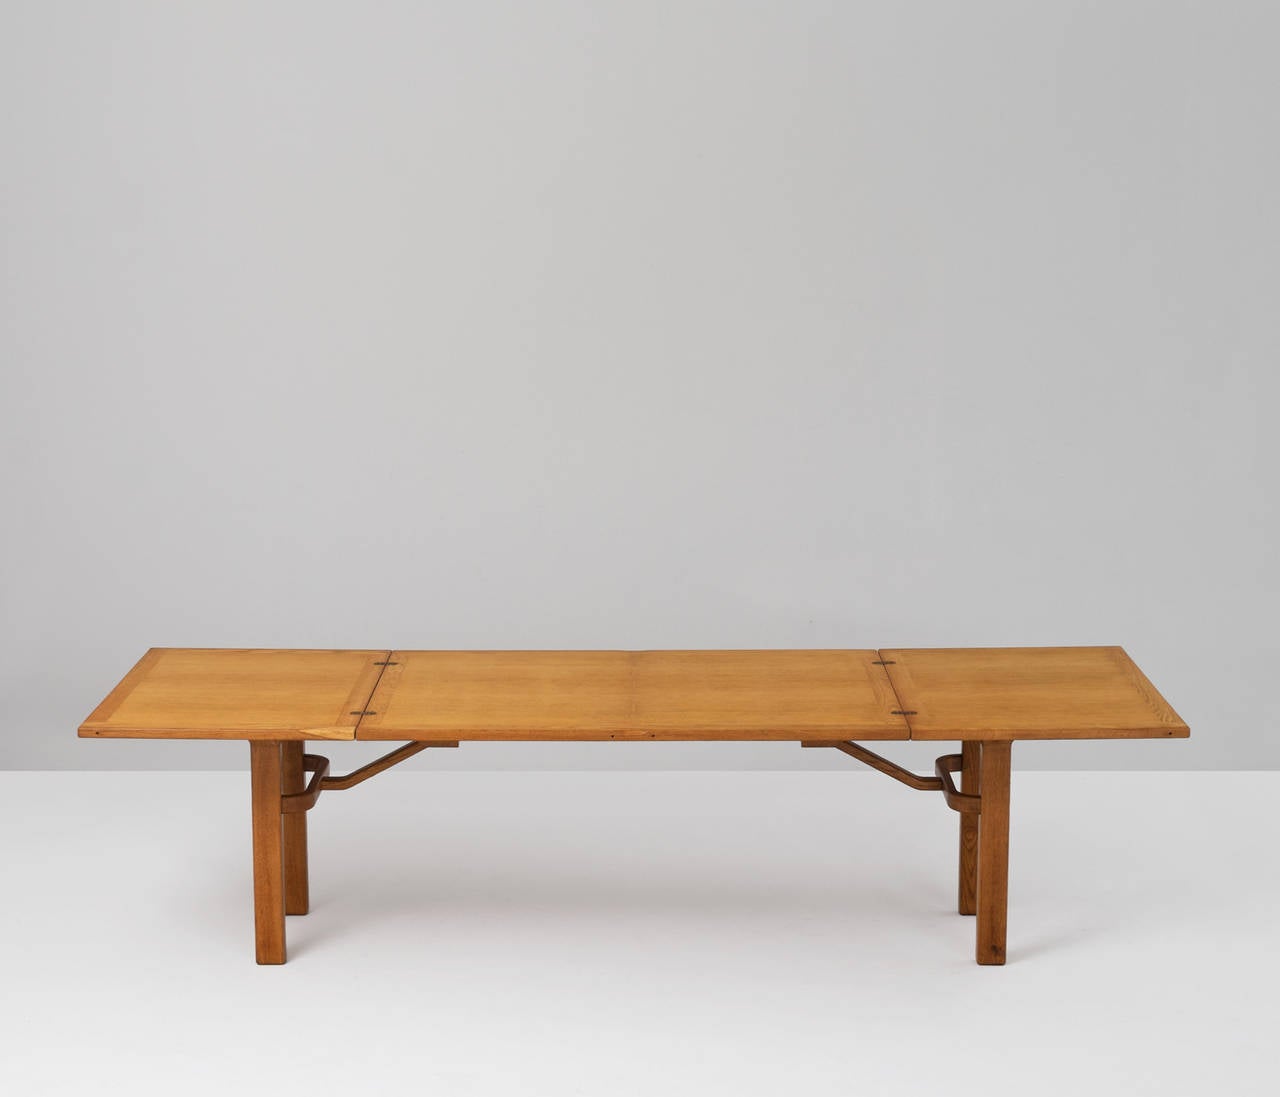 Extendible dining table in oak by Guillerme et Chambron, France, 1950s.

The solid shaped legs with the extendible leave are in a very good working condition. This table can easily be transformed into a extended version to enjoy a larger example.